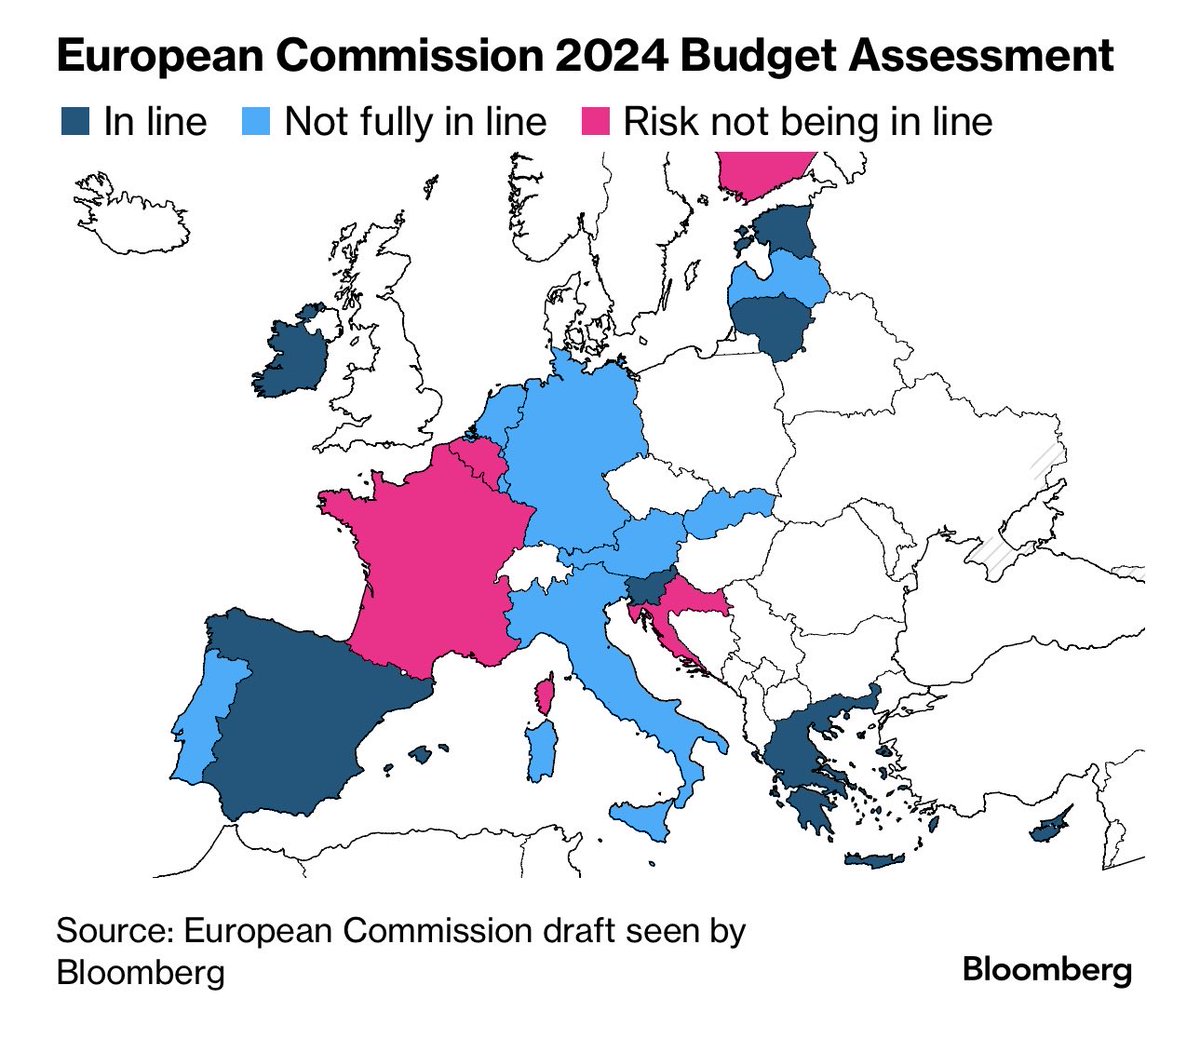 Greece in the shortlist of countries fully in line with EU fiscal 2024 assessment. France, Belgium, Finland(!) and Croatia in risk of not being in line. Germany et al not fully in line. Who would have thought! Amazing success 🇬🇷